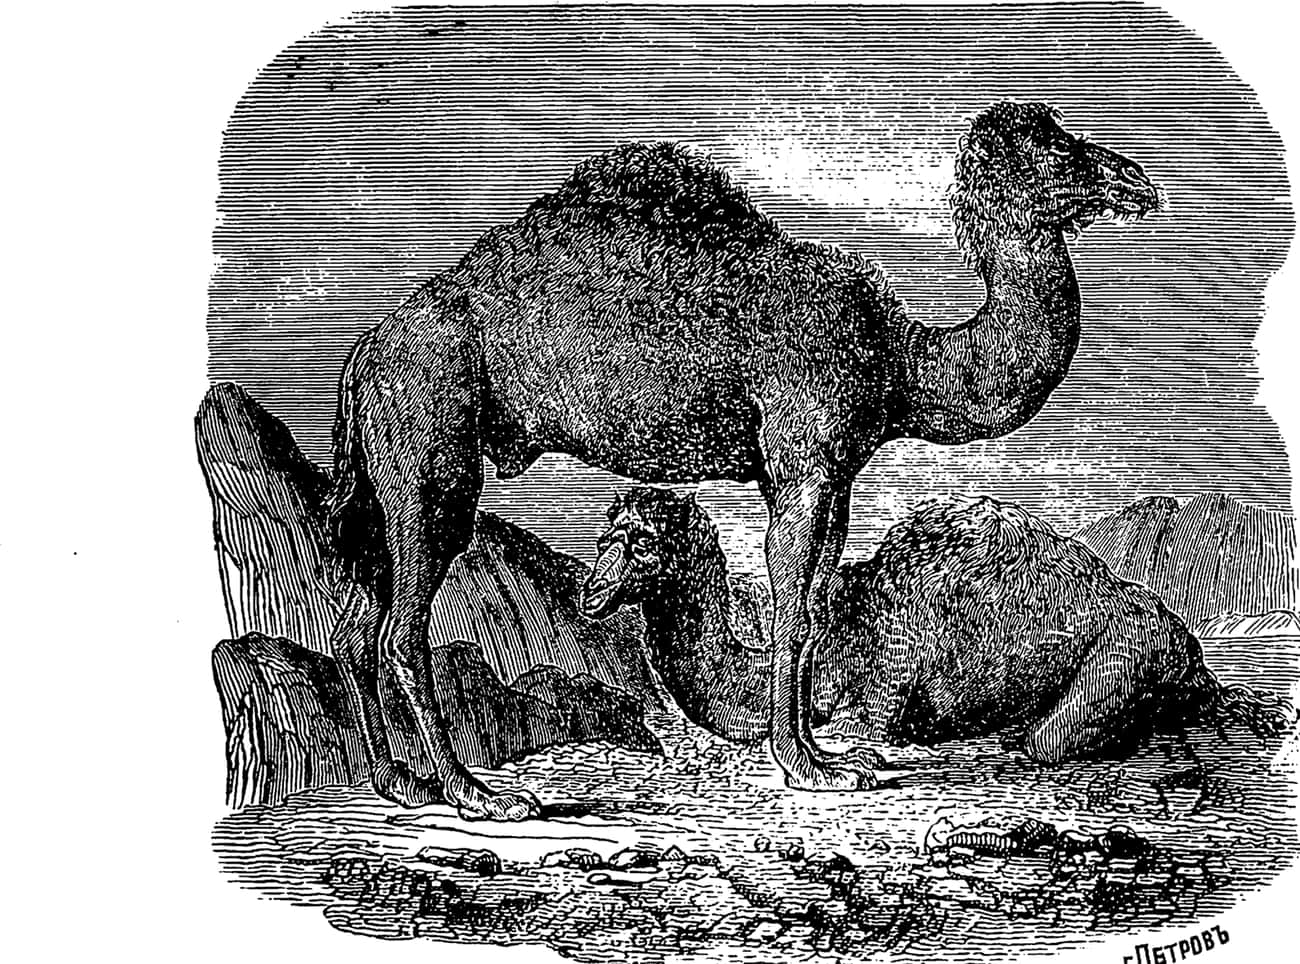 The Civil War Meant The End Of The Camp Verde Camels